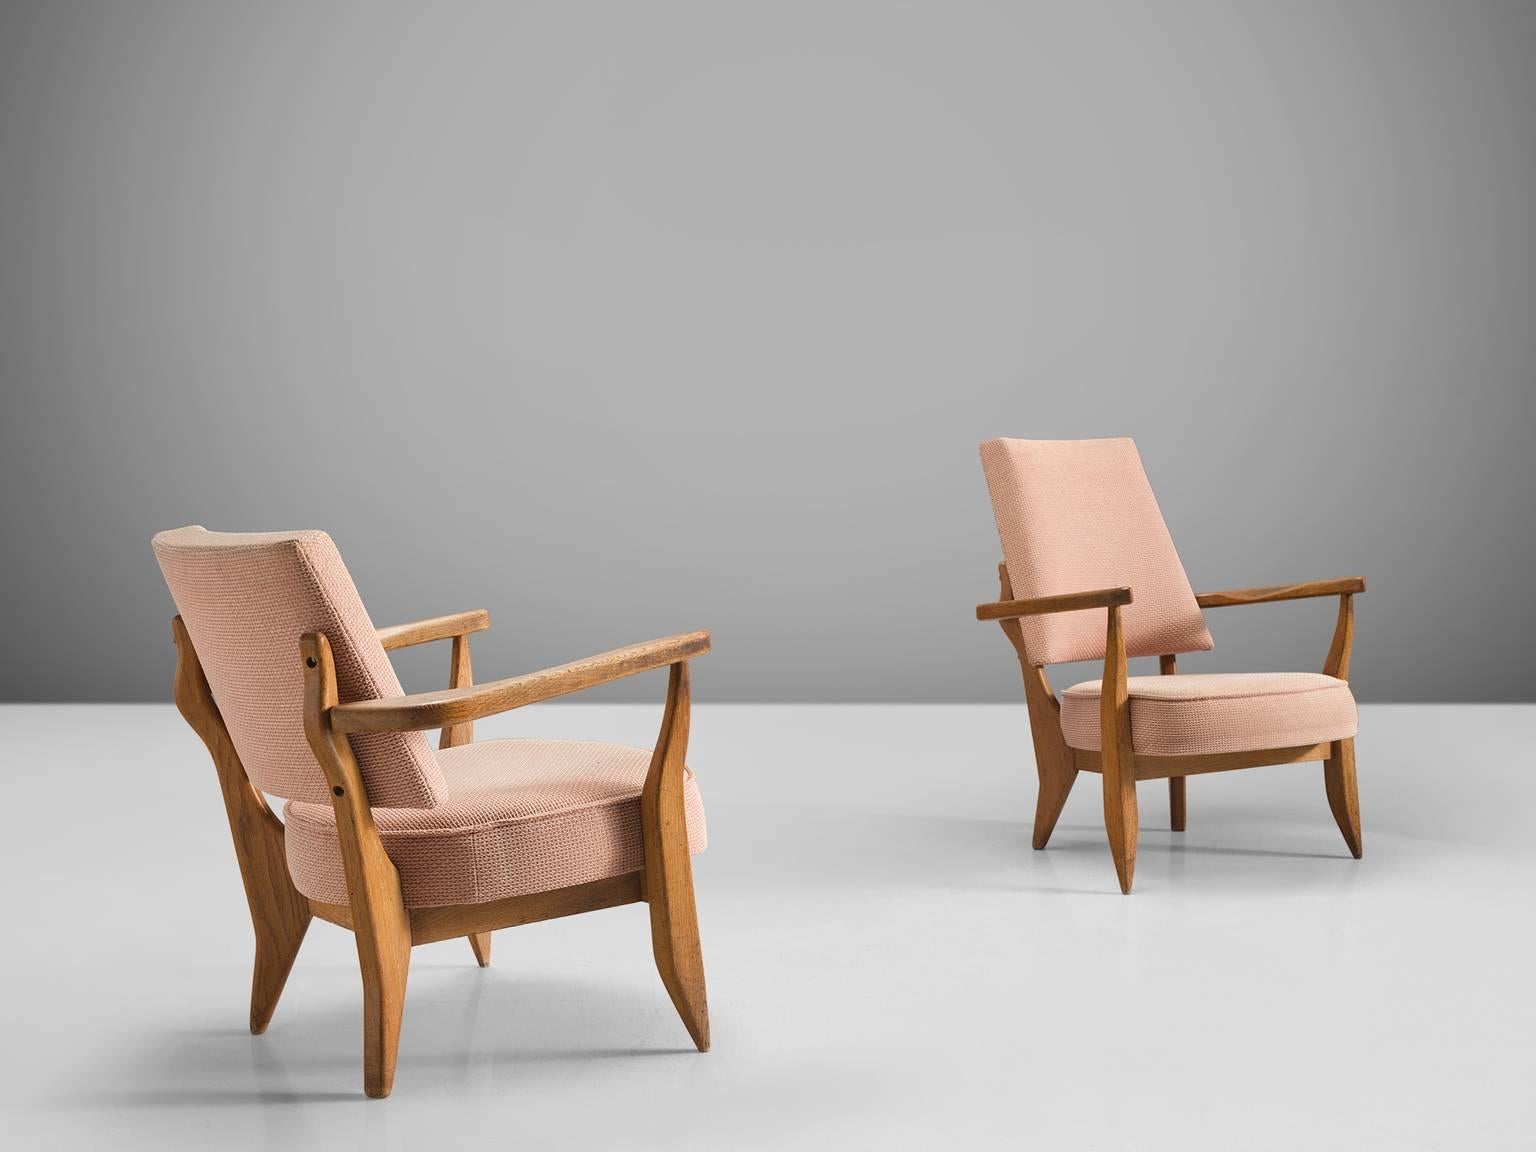 Jacques Chambron and Robert Guillerme, Him and Hir easy chairs, beige and pink fabric, oak, France, 1950s

This sculptural set of easy chairs by Guillerme and Chambron is very well executed and made out of solid, carved blond oak. This set of